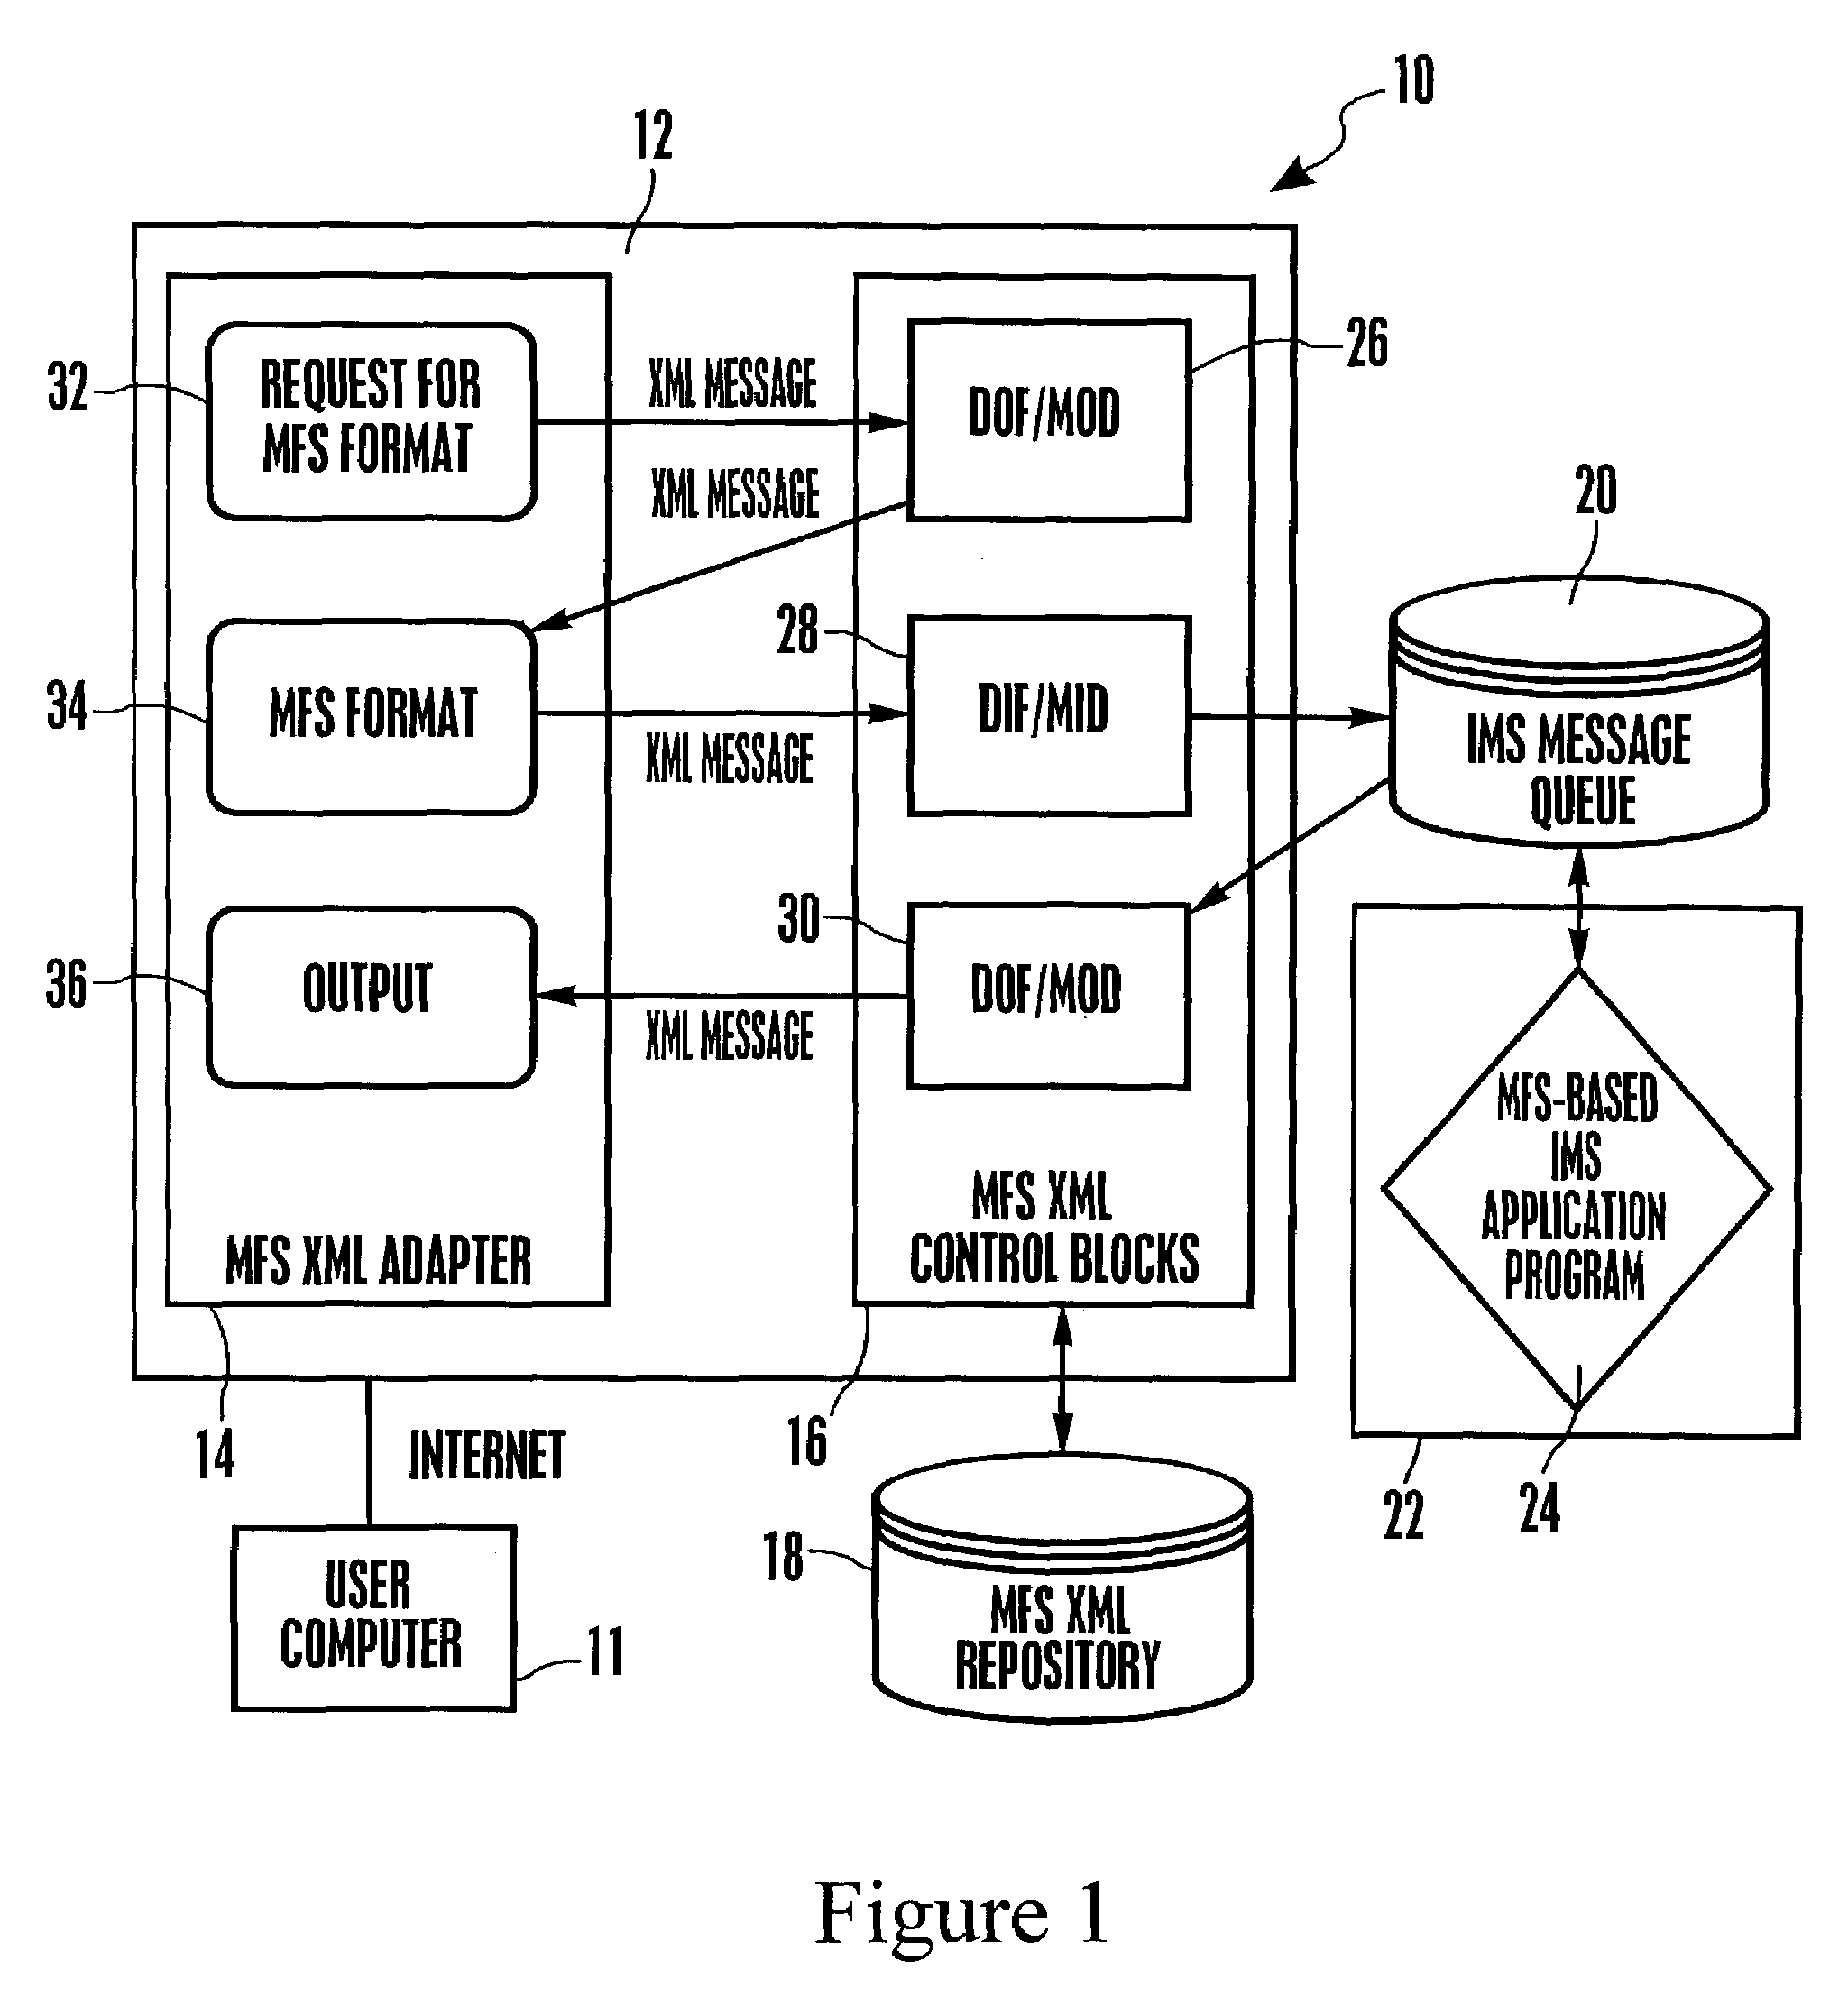 System and method for representing MFS control blocks in XML for MFS-based IMS applications